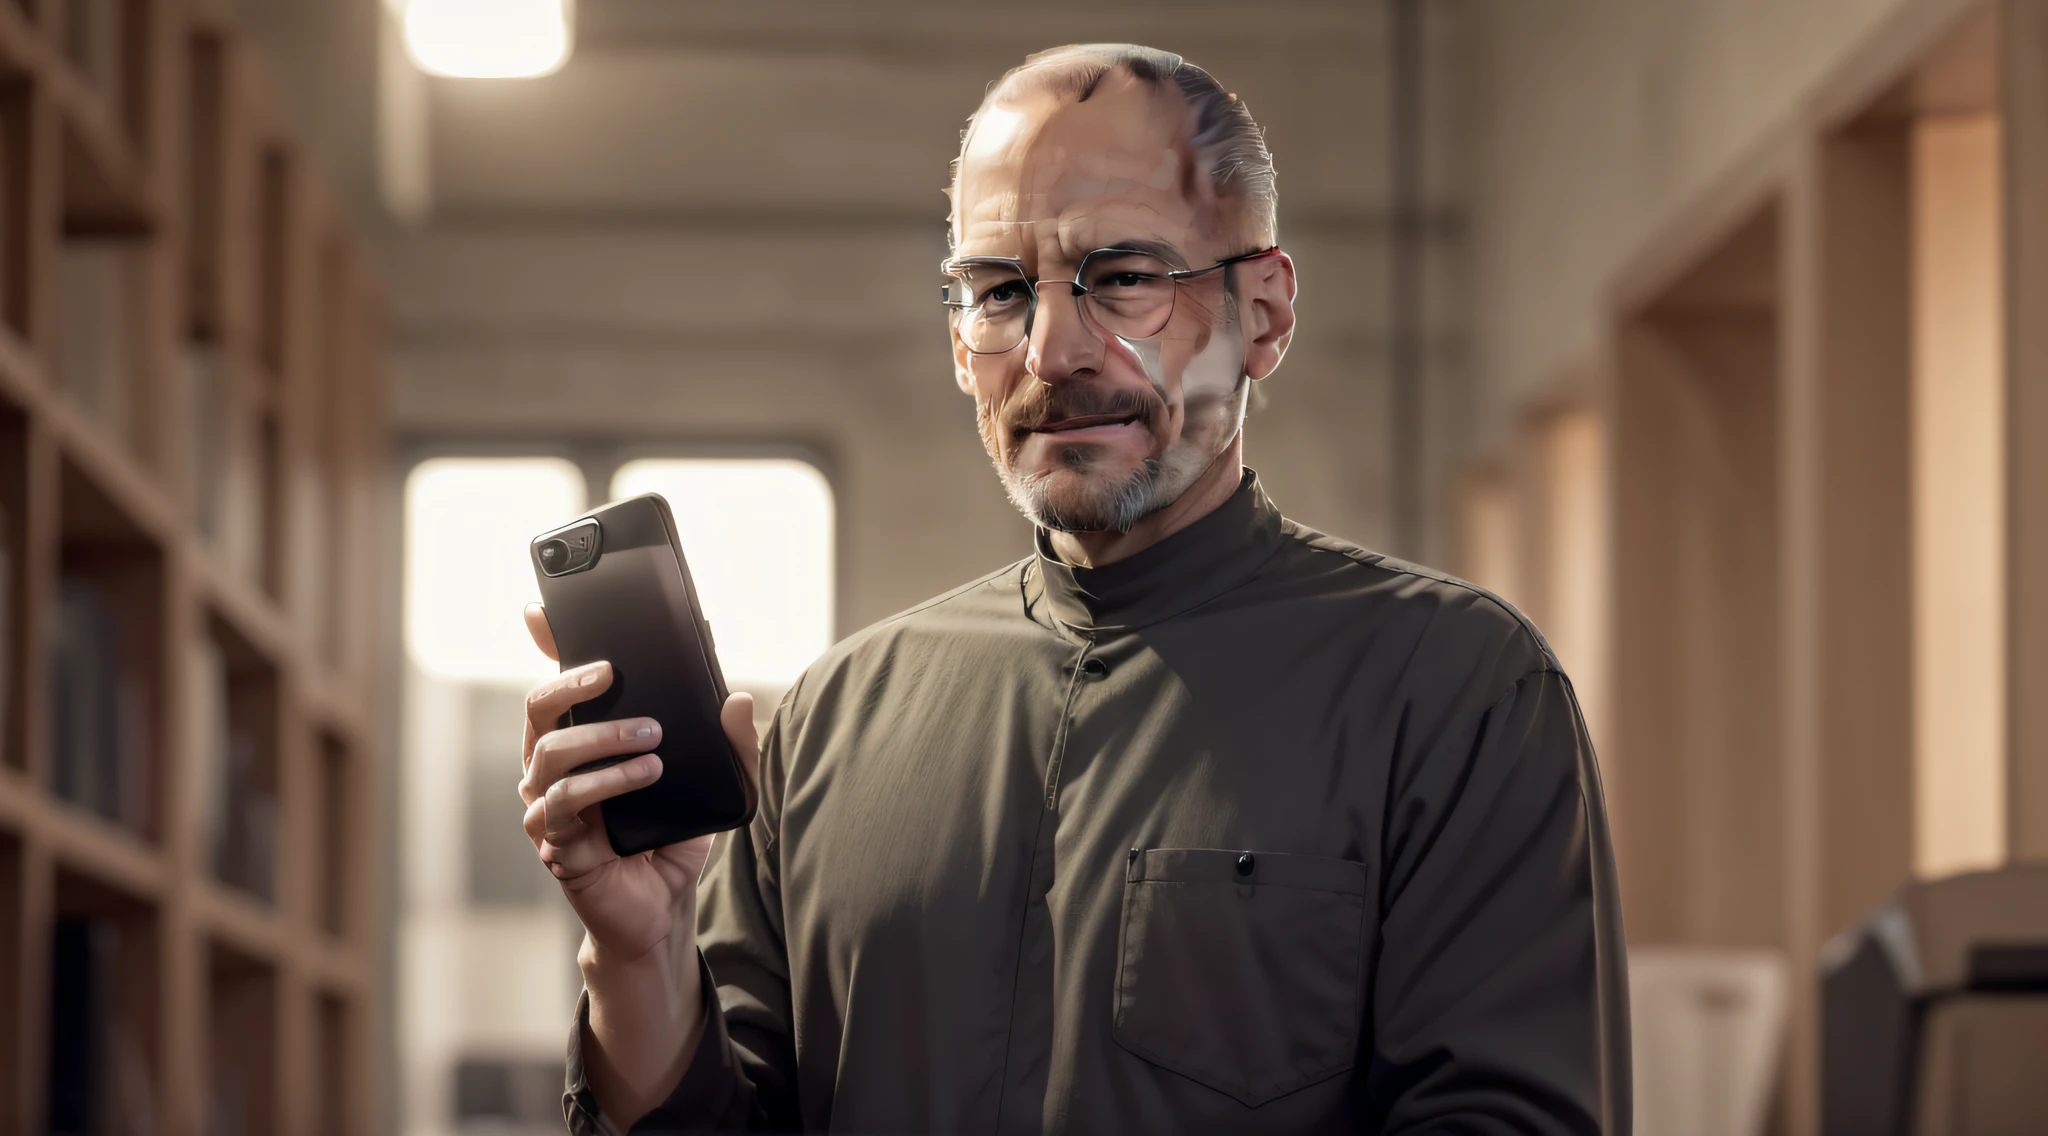 Steven Poul Jobs holding a cell phone in his hand, glasses, beard, Apple, Apple Phone, iPhone, Apple Cell Phone, confident smile, Pirador,